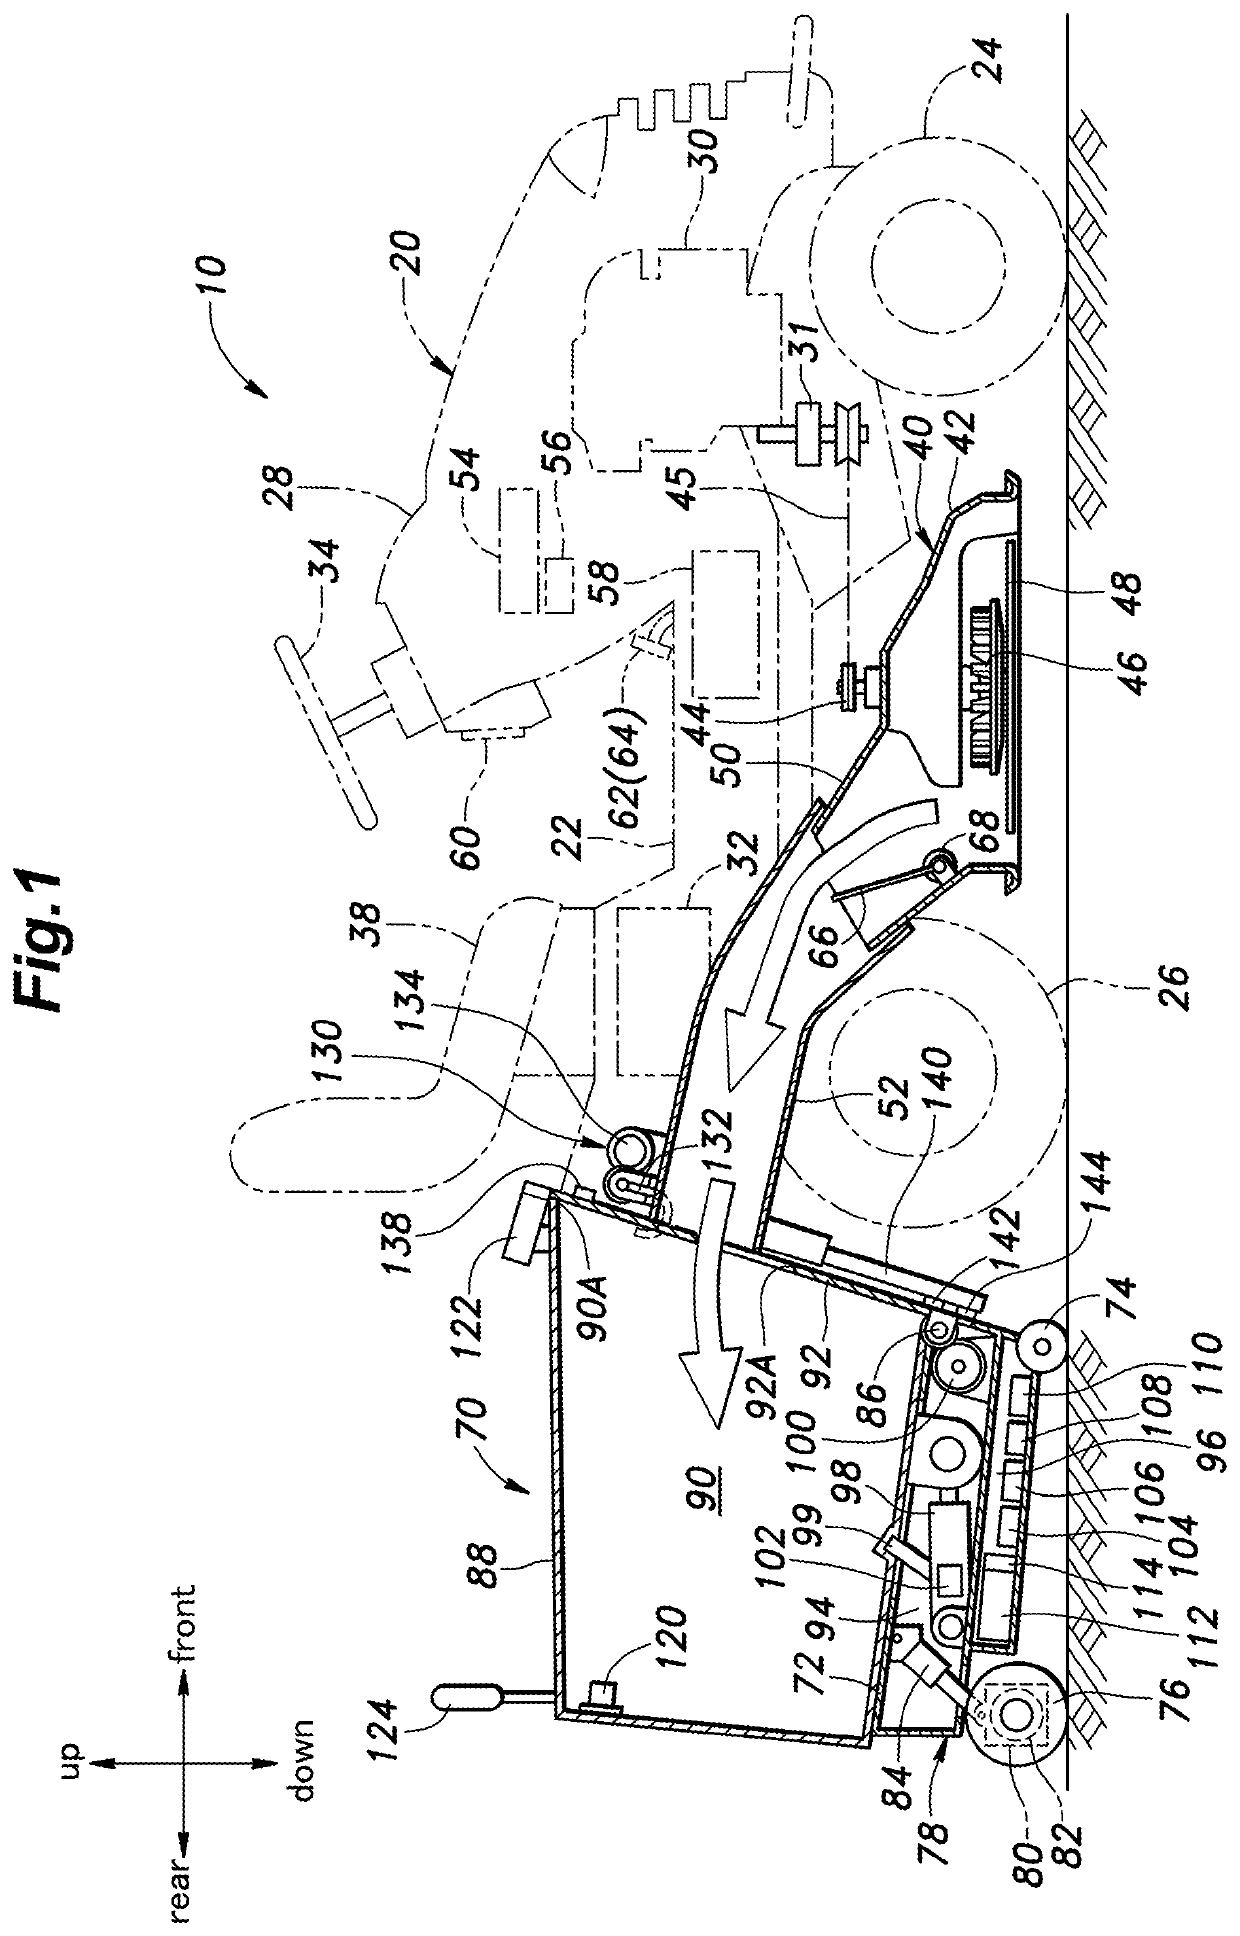 Work equipment with container lifting device